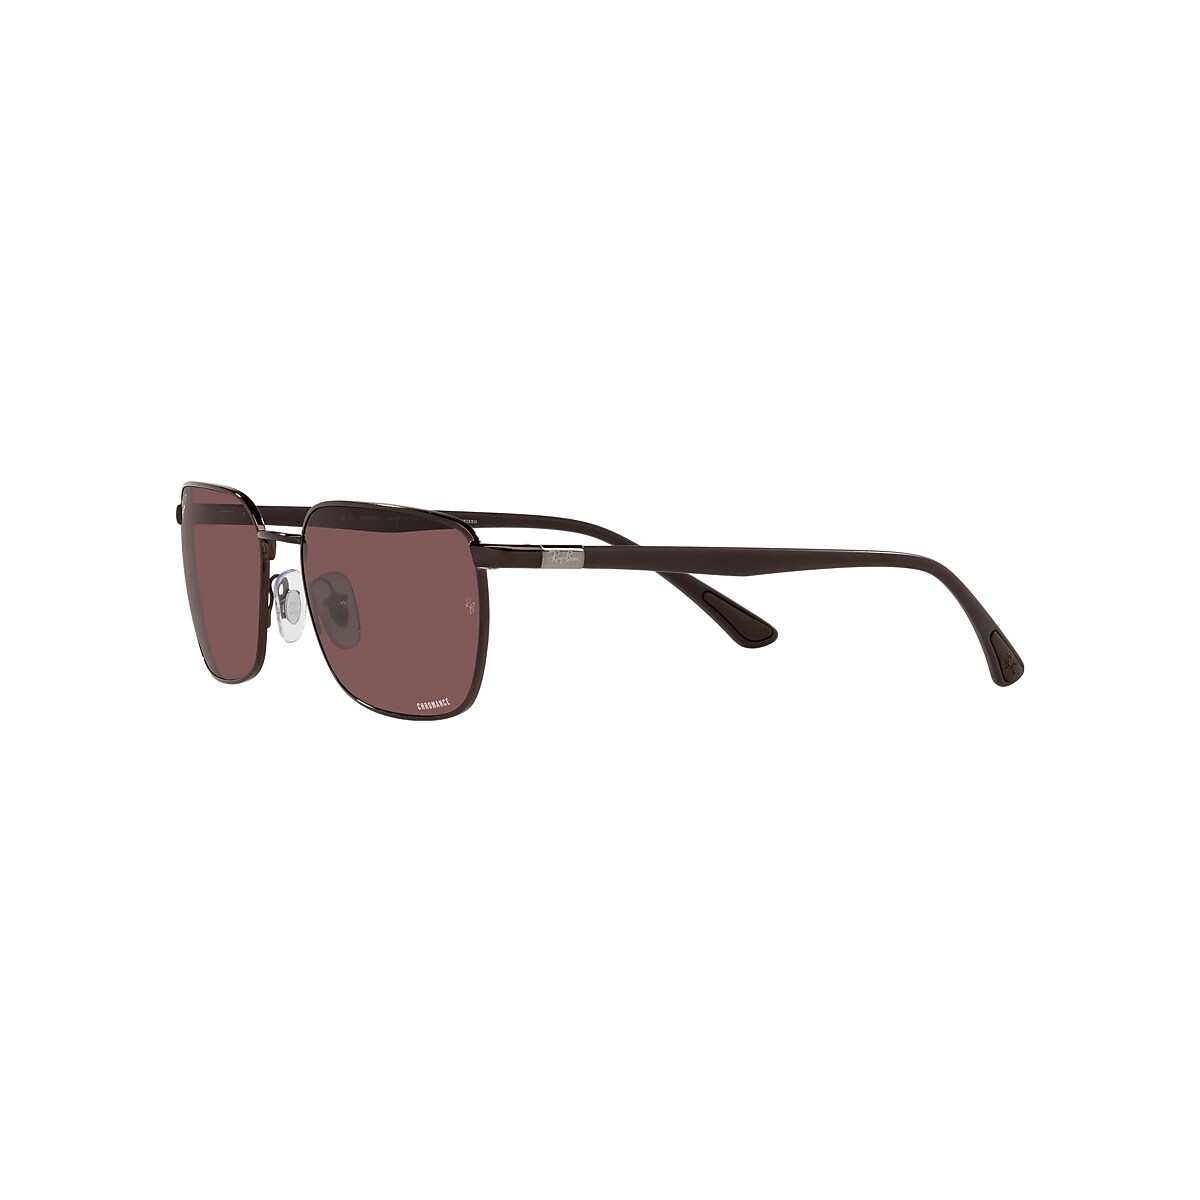 RB3684CH CHROMANCE Sunglasses in Brown and Dark Violet - RB3684CH